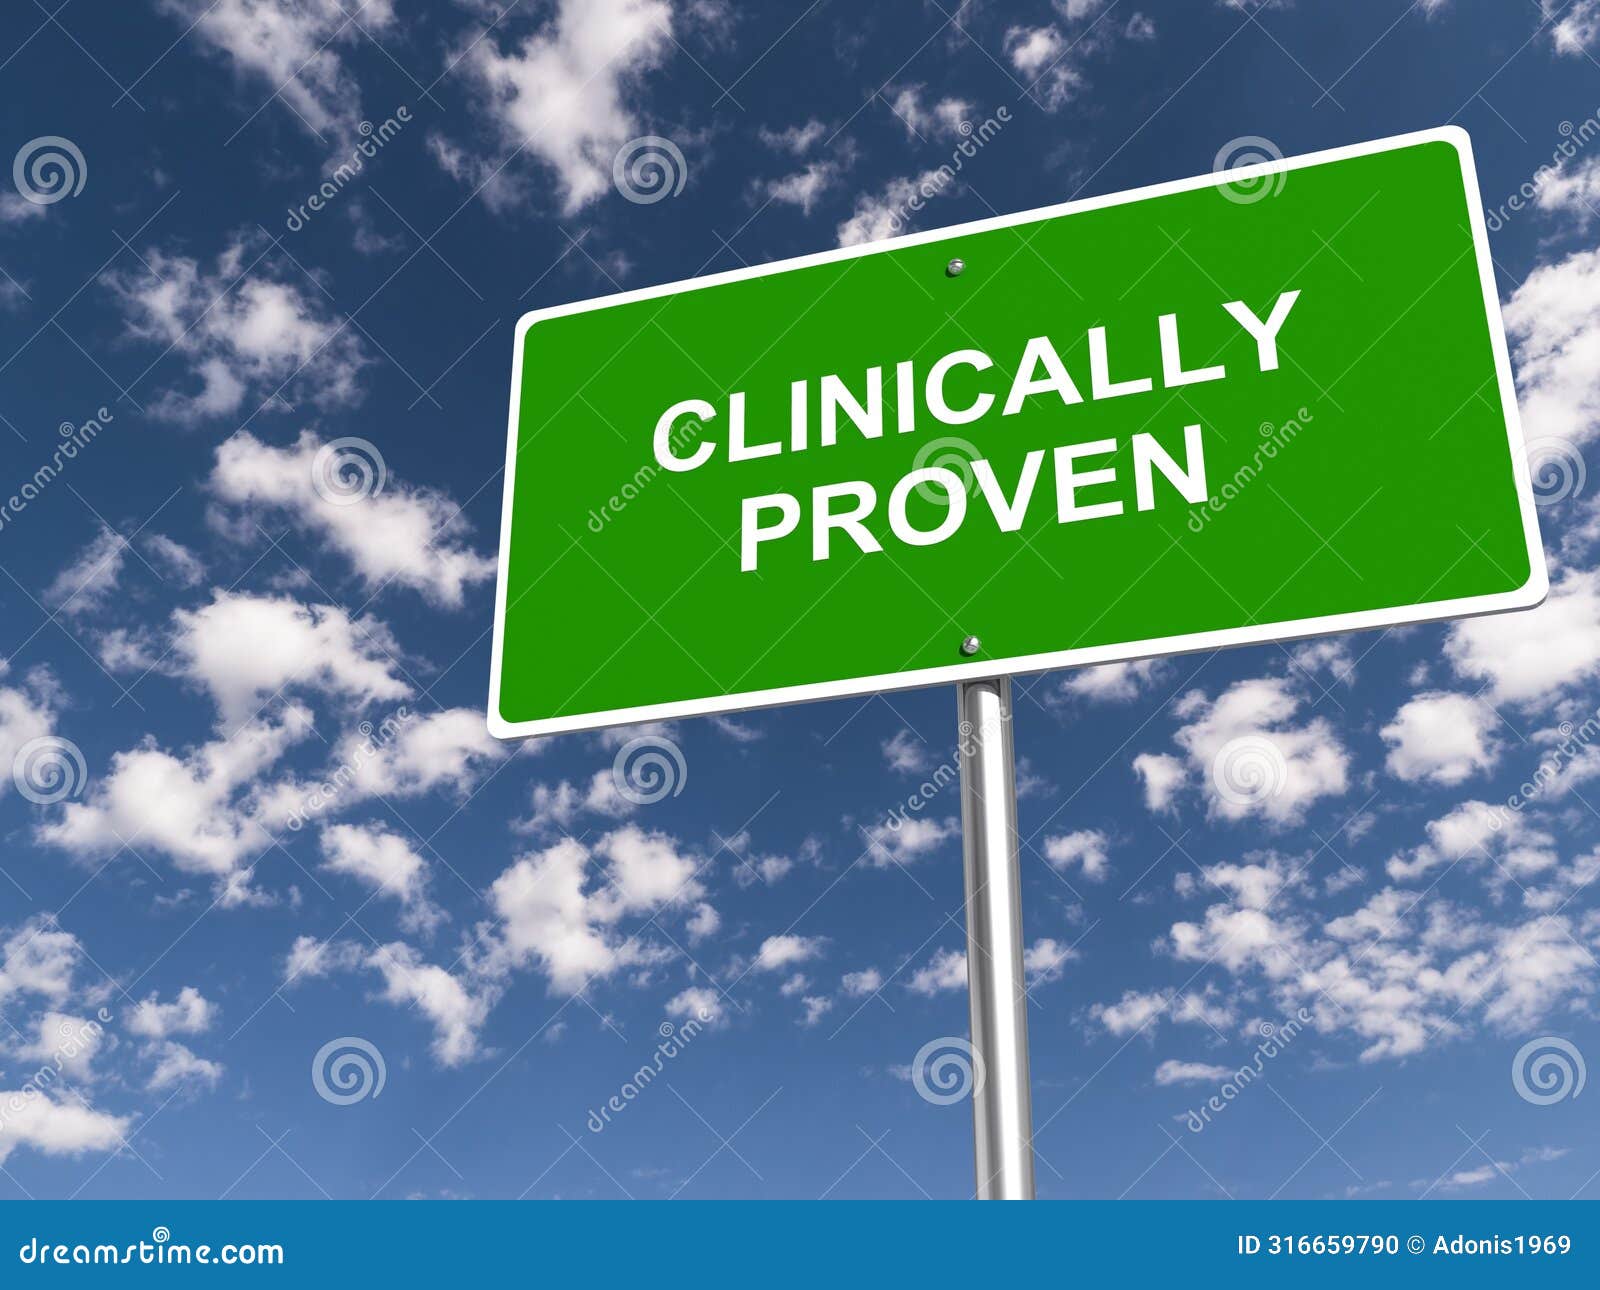 clinically proven traffic sign on blue sky